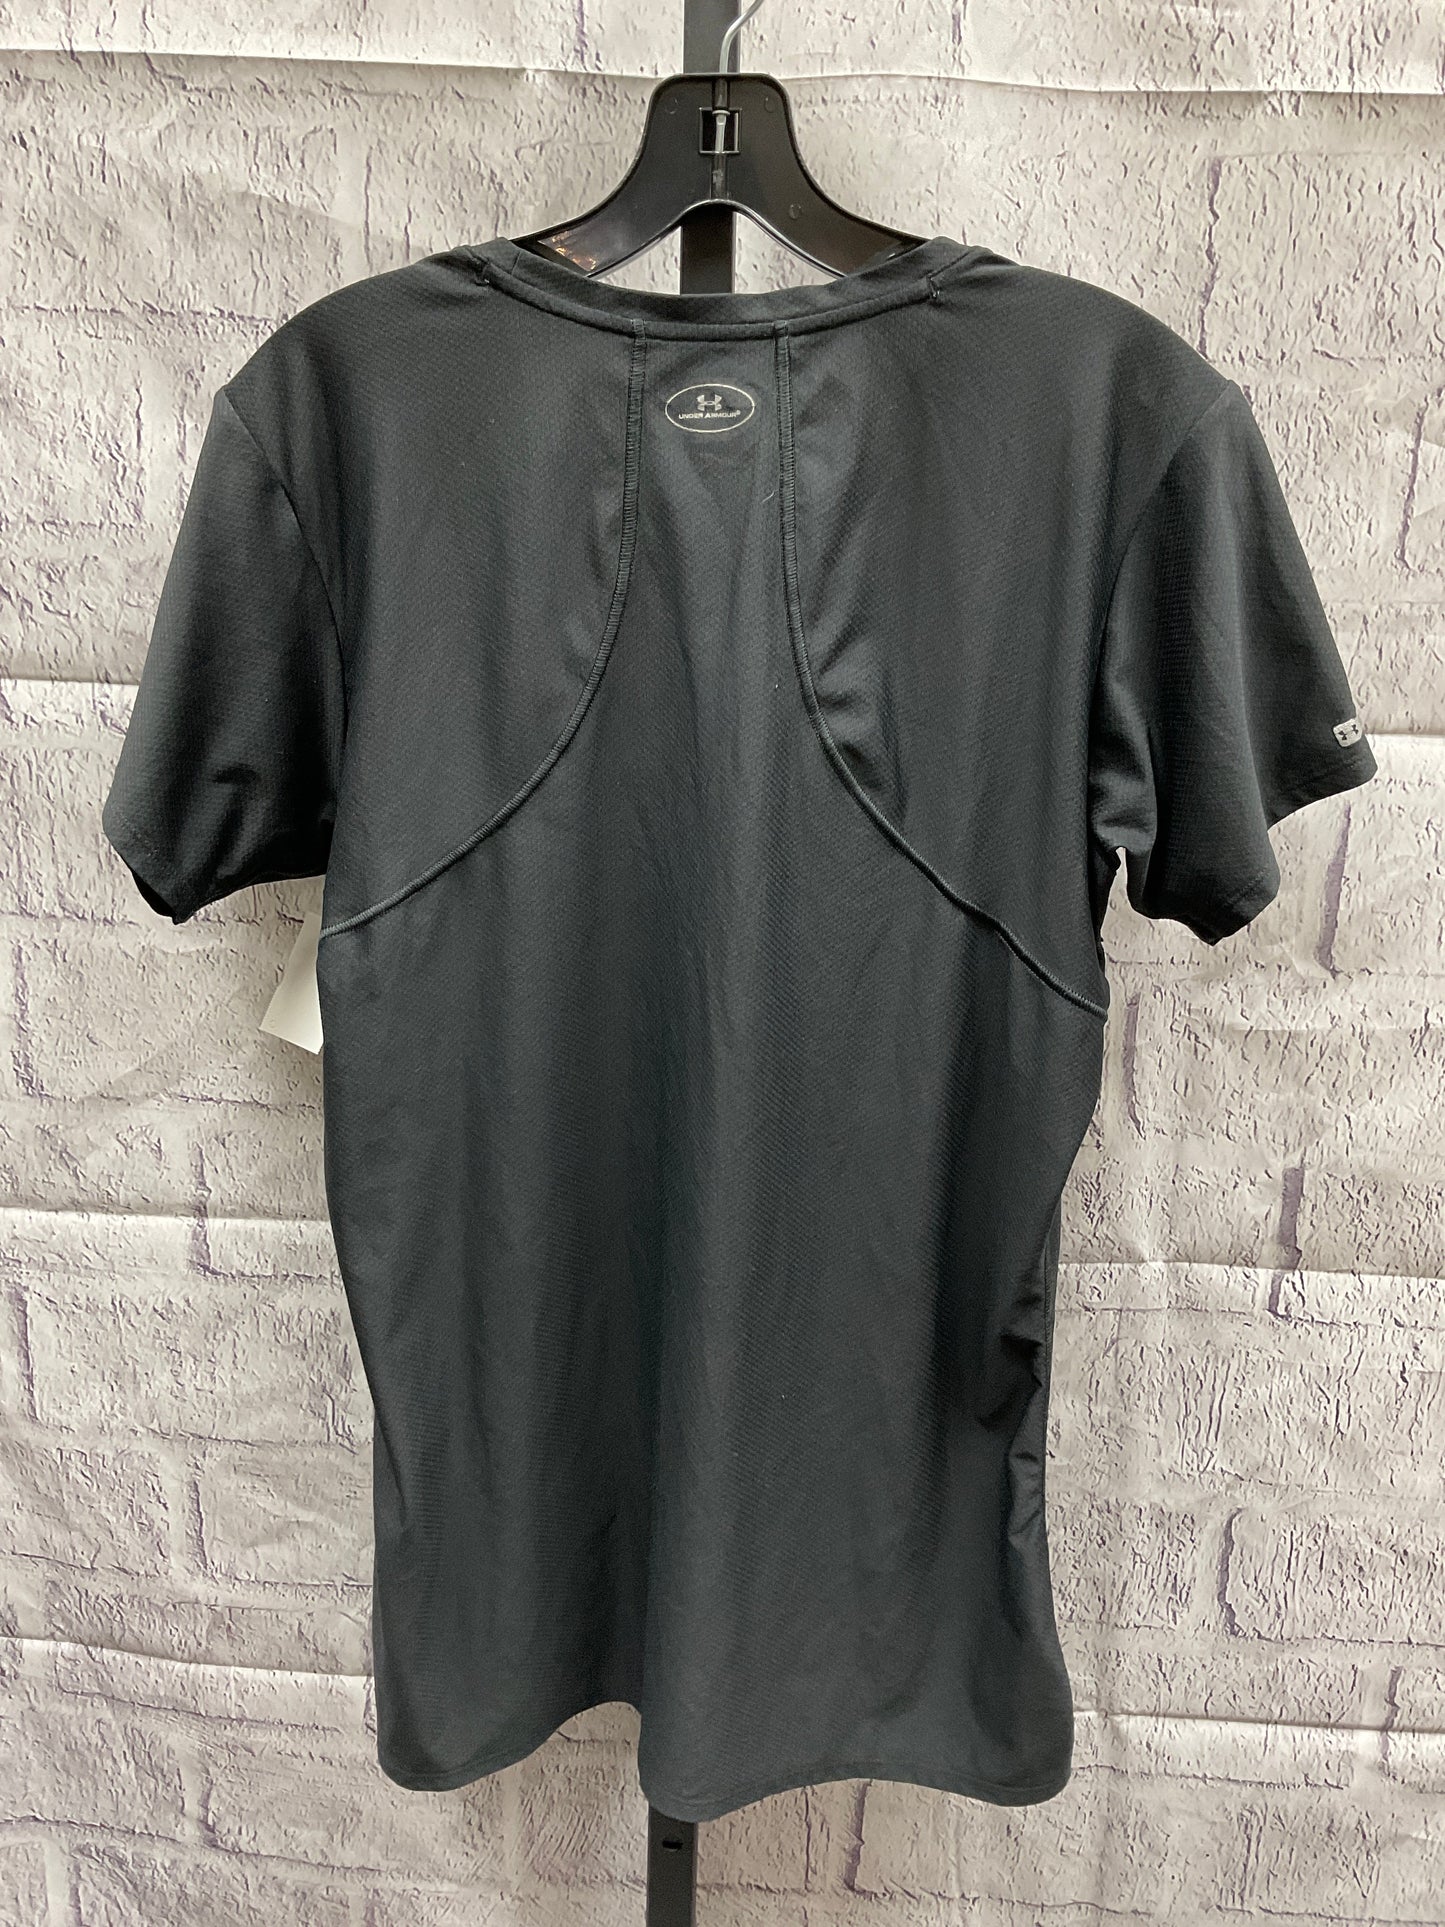 Athletic Top Short Sleeve By Under Armour  Size: Xl